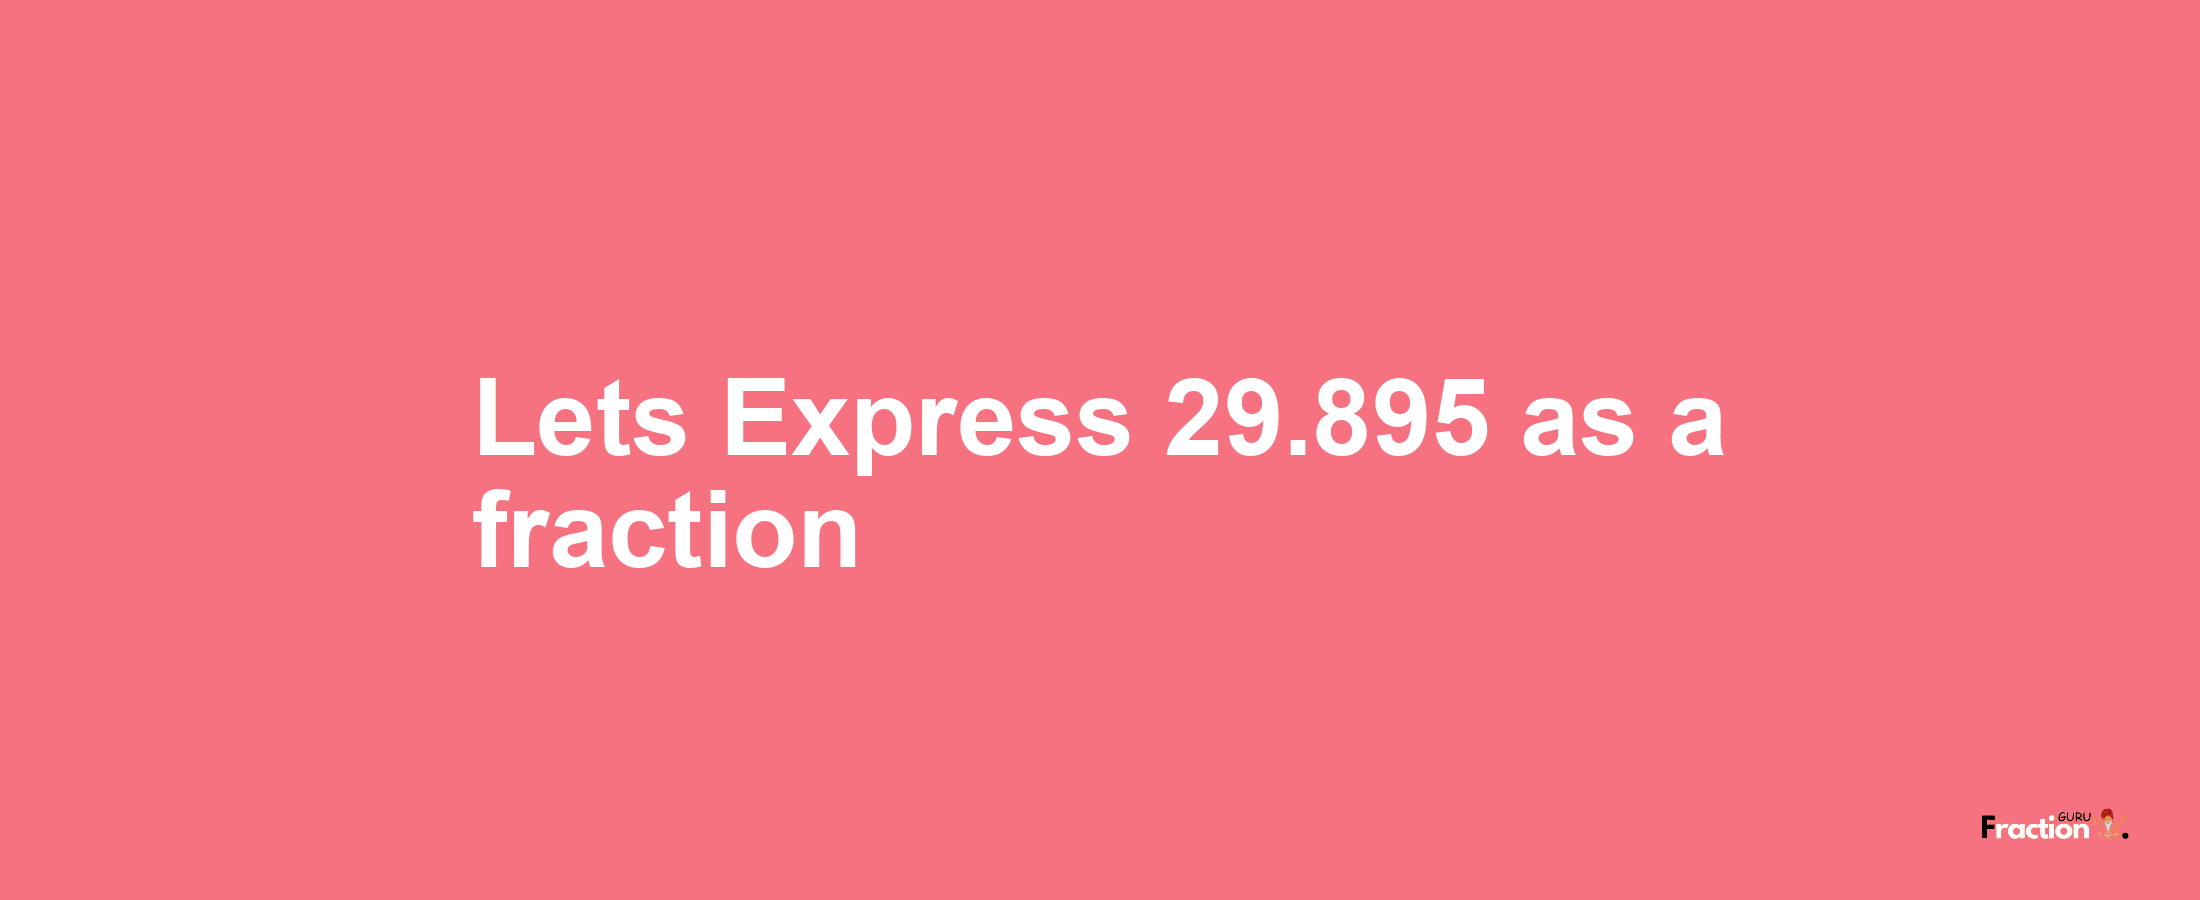 Lets Express 29.895 as afraction